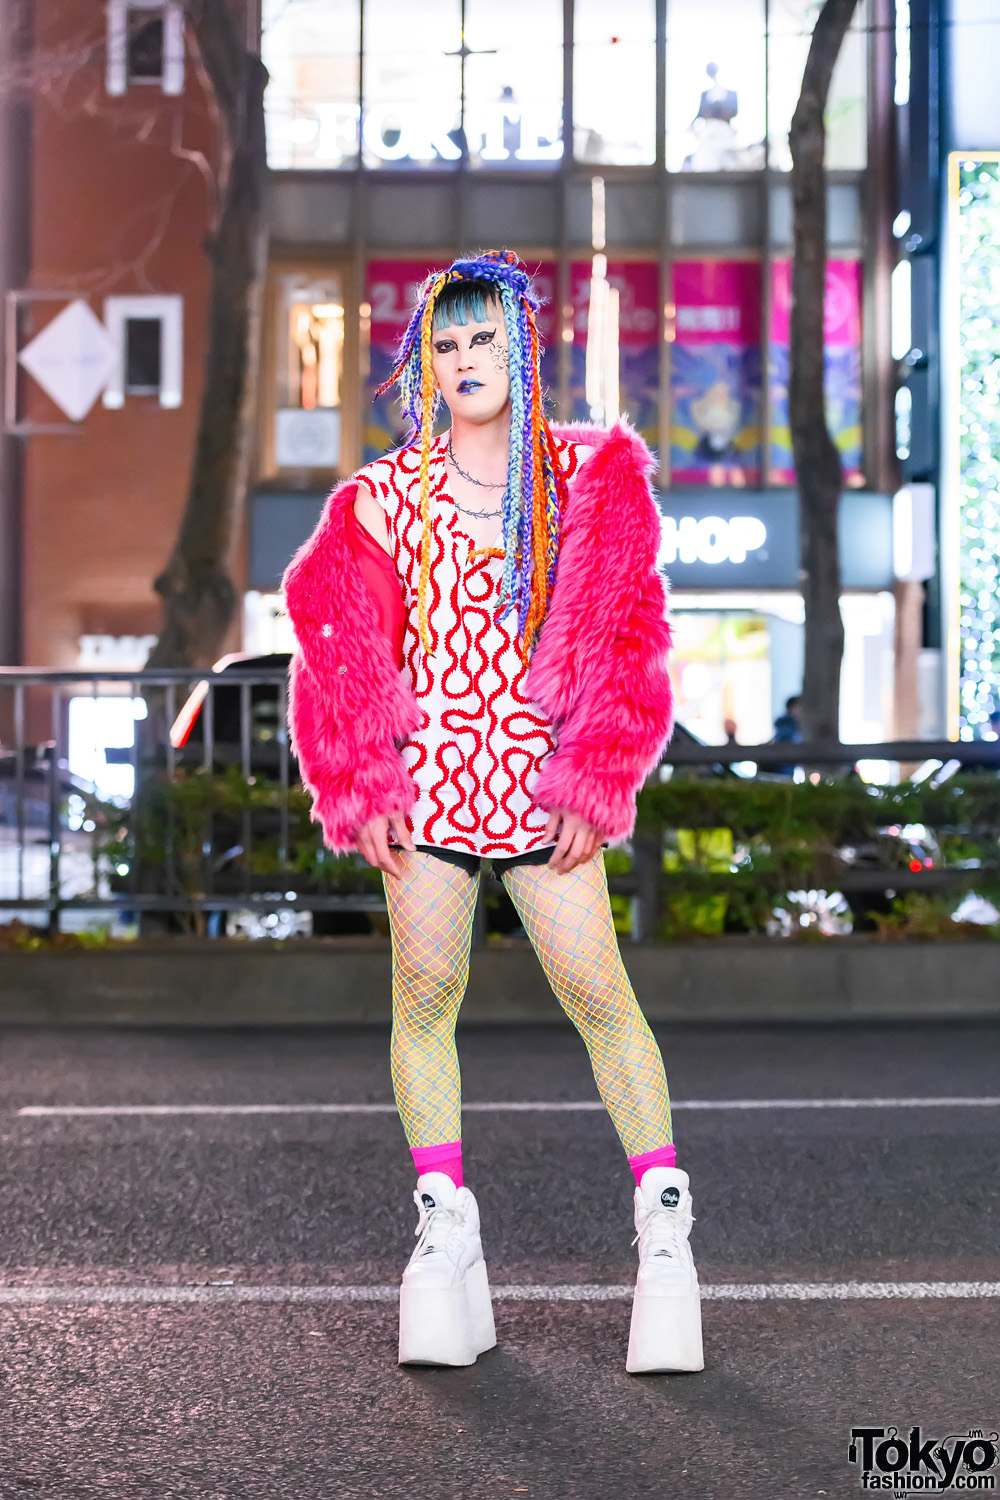 Vintage Fashion Buyer's Tokyo Street Style w/ Braided Hair Falls, Two-Tone Lips, Furry Jacket, Fishnets, Vivienne Westwood World's End Geometric Print Top & Buffalo Tall Sneakers